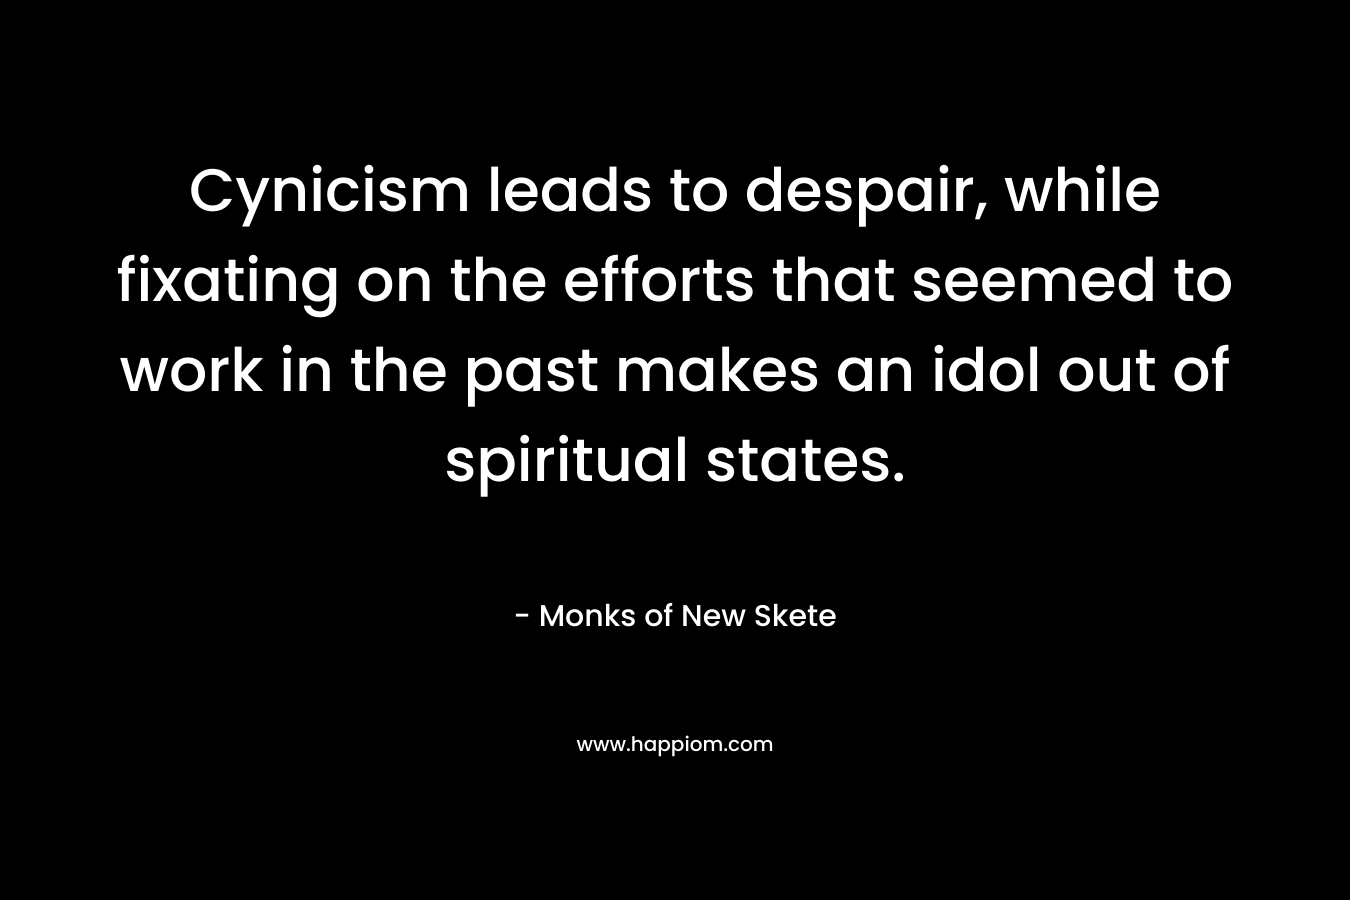 Cynicism leads to despair, while fixating on the efforts that seemed to work in the past makes an idol out of spiritual states. – Monks of New Skete